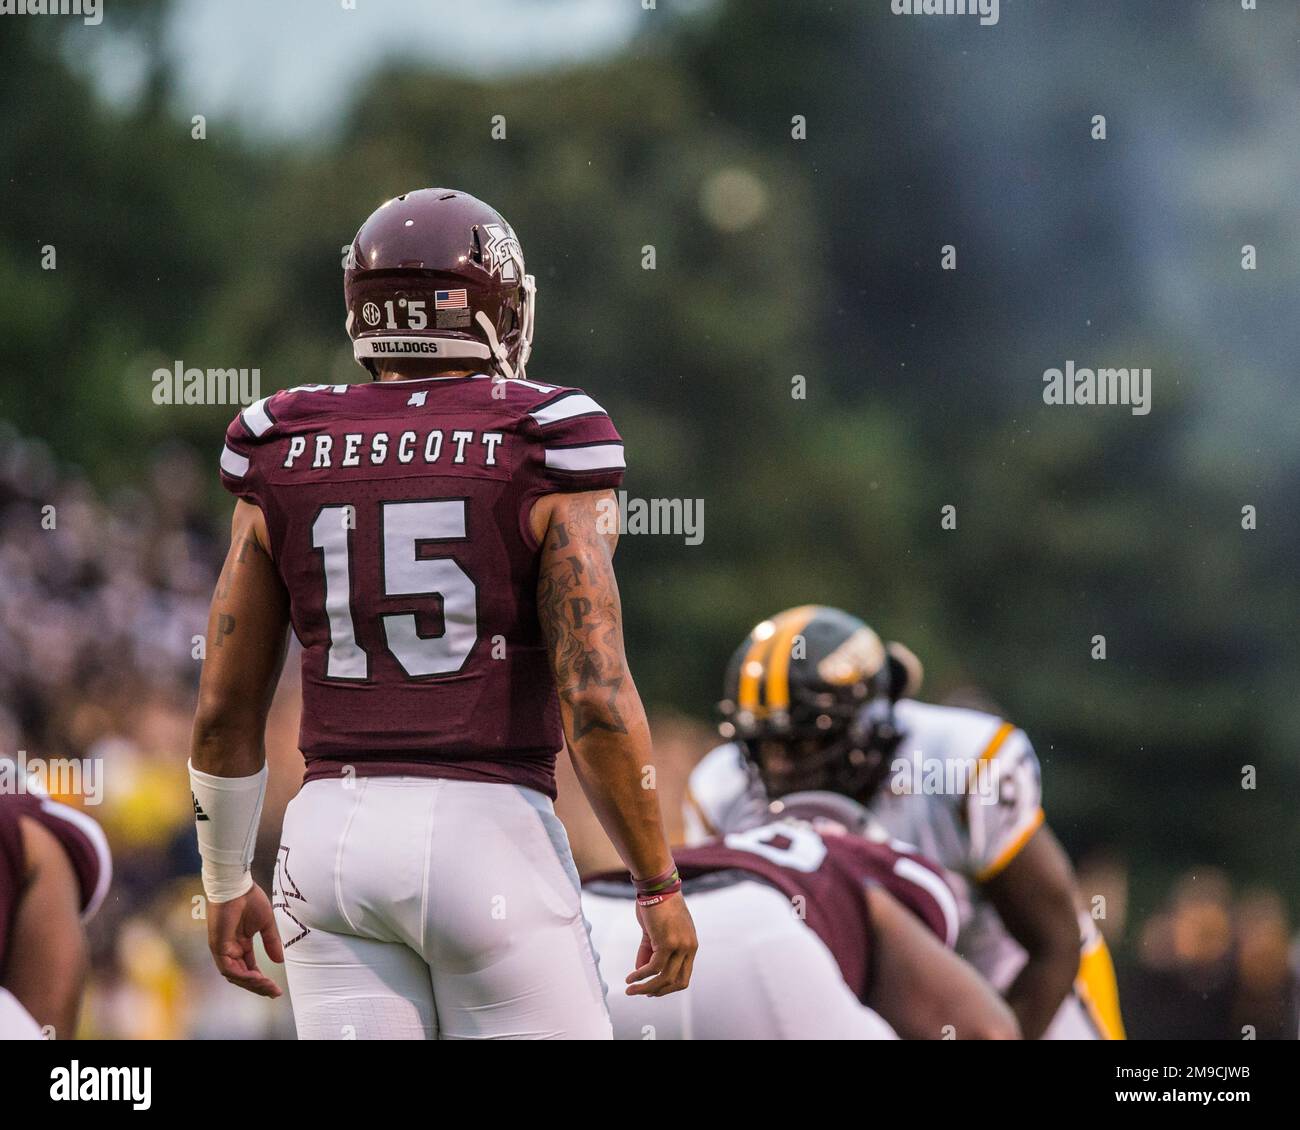 Dak Prescott  stands ready to call a  play against The University of Southern Mississippi.  University of Southern Mississippi vs. Mississippi State University - August 30, 2014, Davis Wade Stadium at Scott Field, Starkville, Mississippi. Credit: Kevin Williams/Alamy Live News. Stock Photo